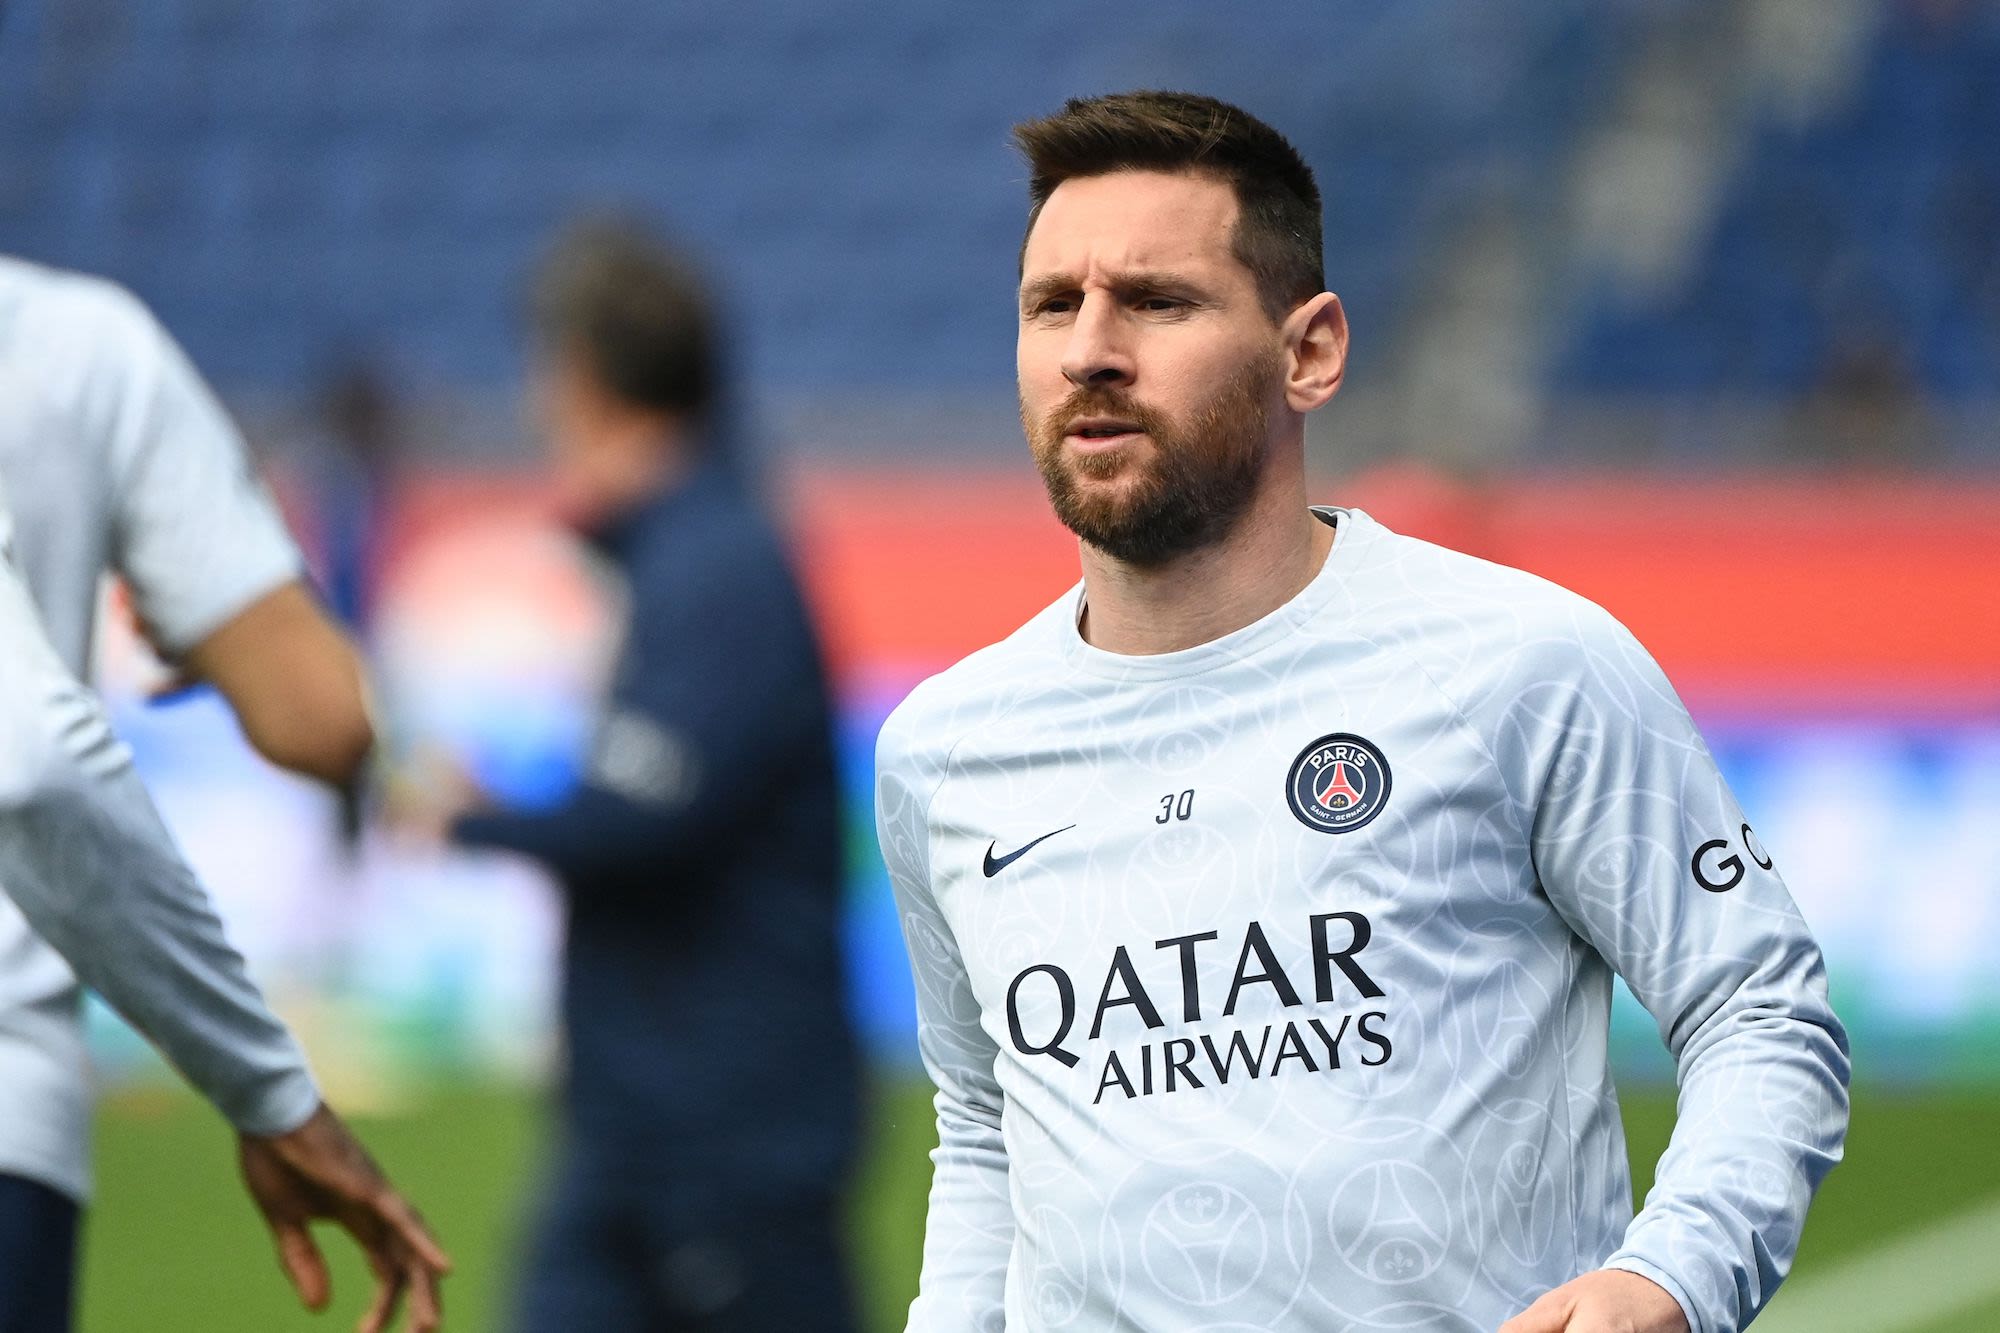 Lionel Messi has verbal pact to leave PSG as early as January as